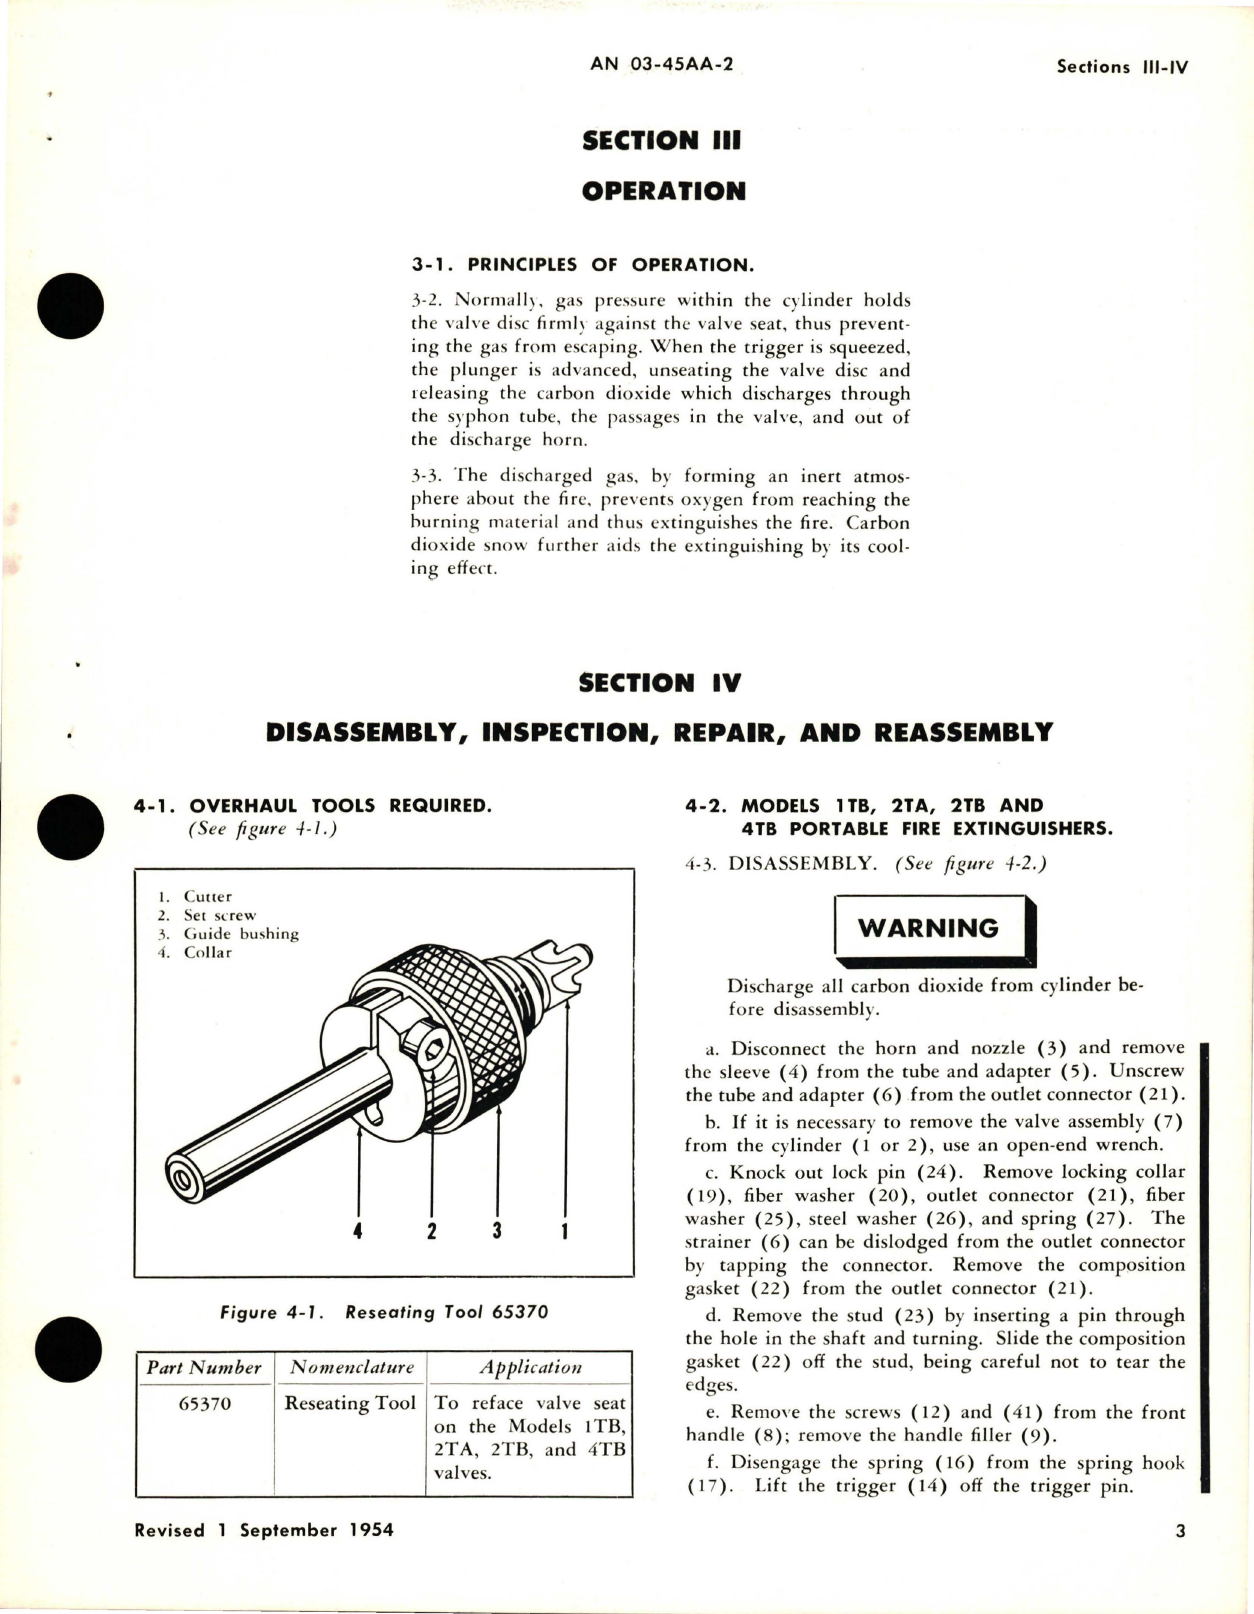 Sample page 5 from AirCorps Library document: Overhaul Instructions for Airborne CO2 Portable Fire Extinguishers - Models 1TB, 2TA, 2TB, 4TB, and 5TA